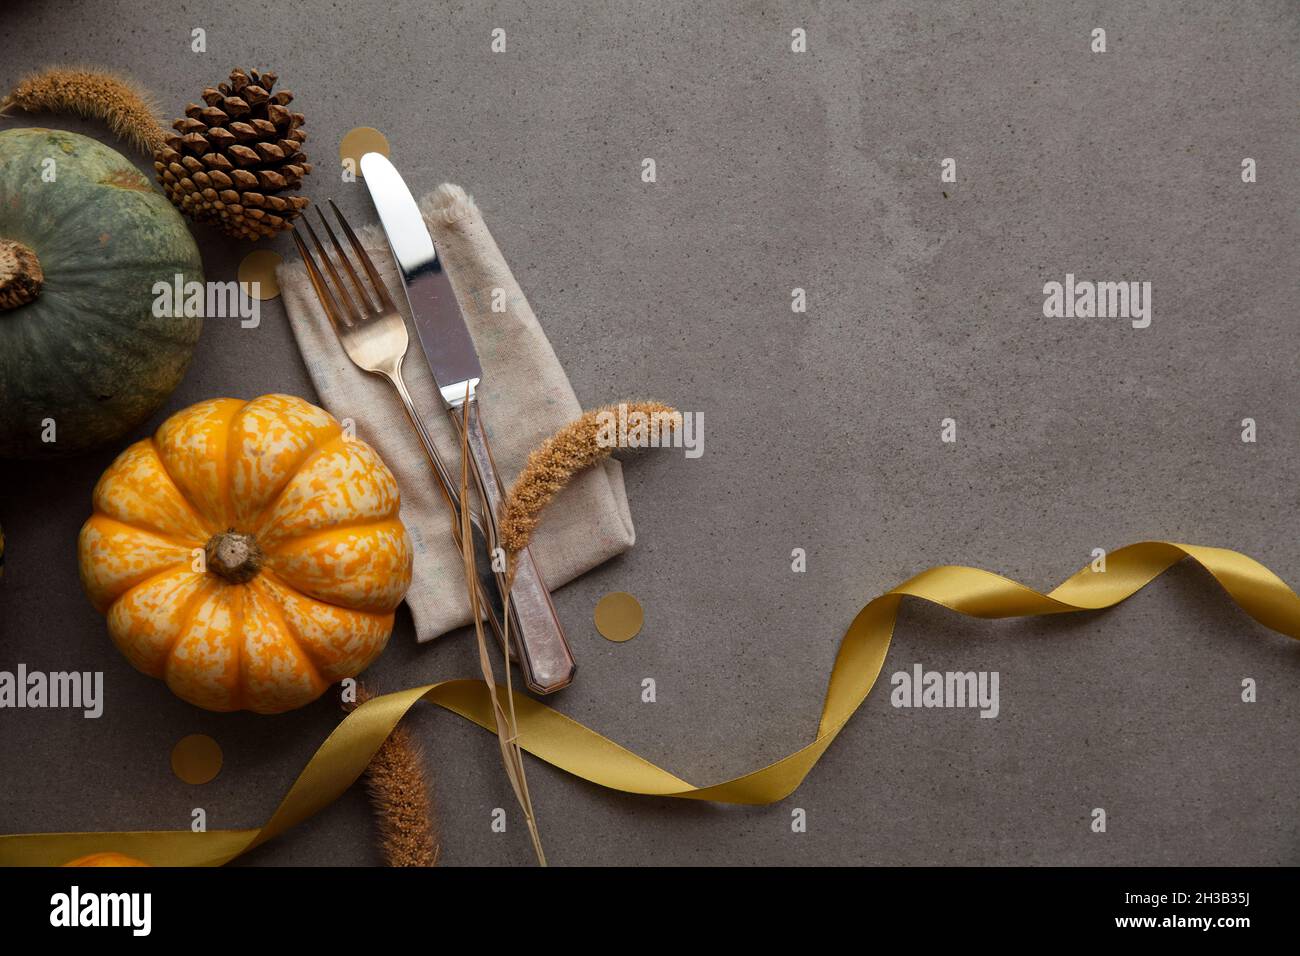 Autumn place setting lifestyle thanksgiving background with cutlery and pumpkins Stock Photo